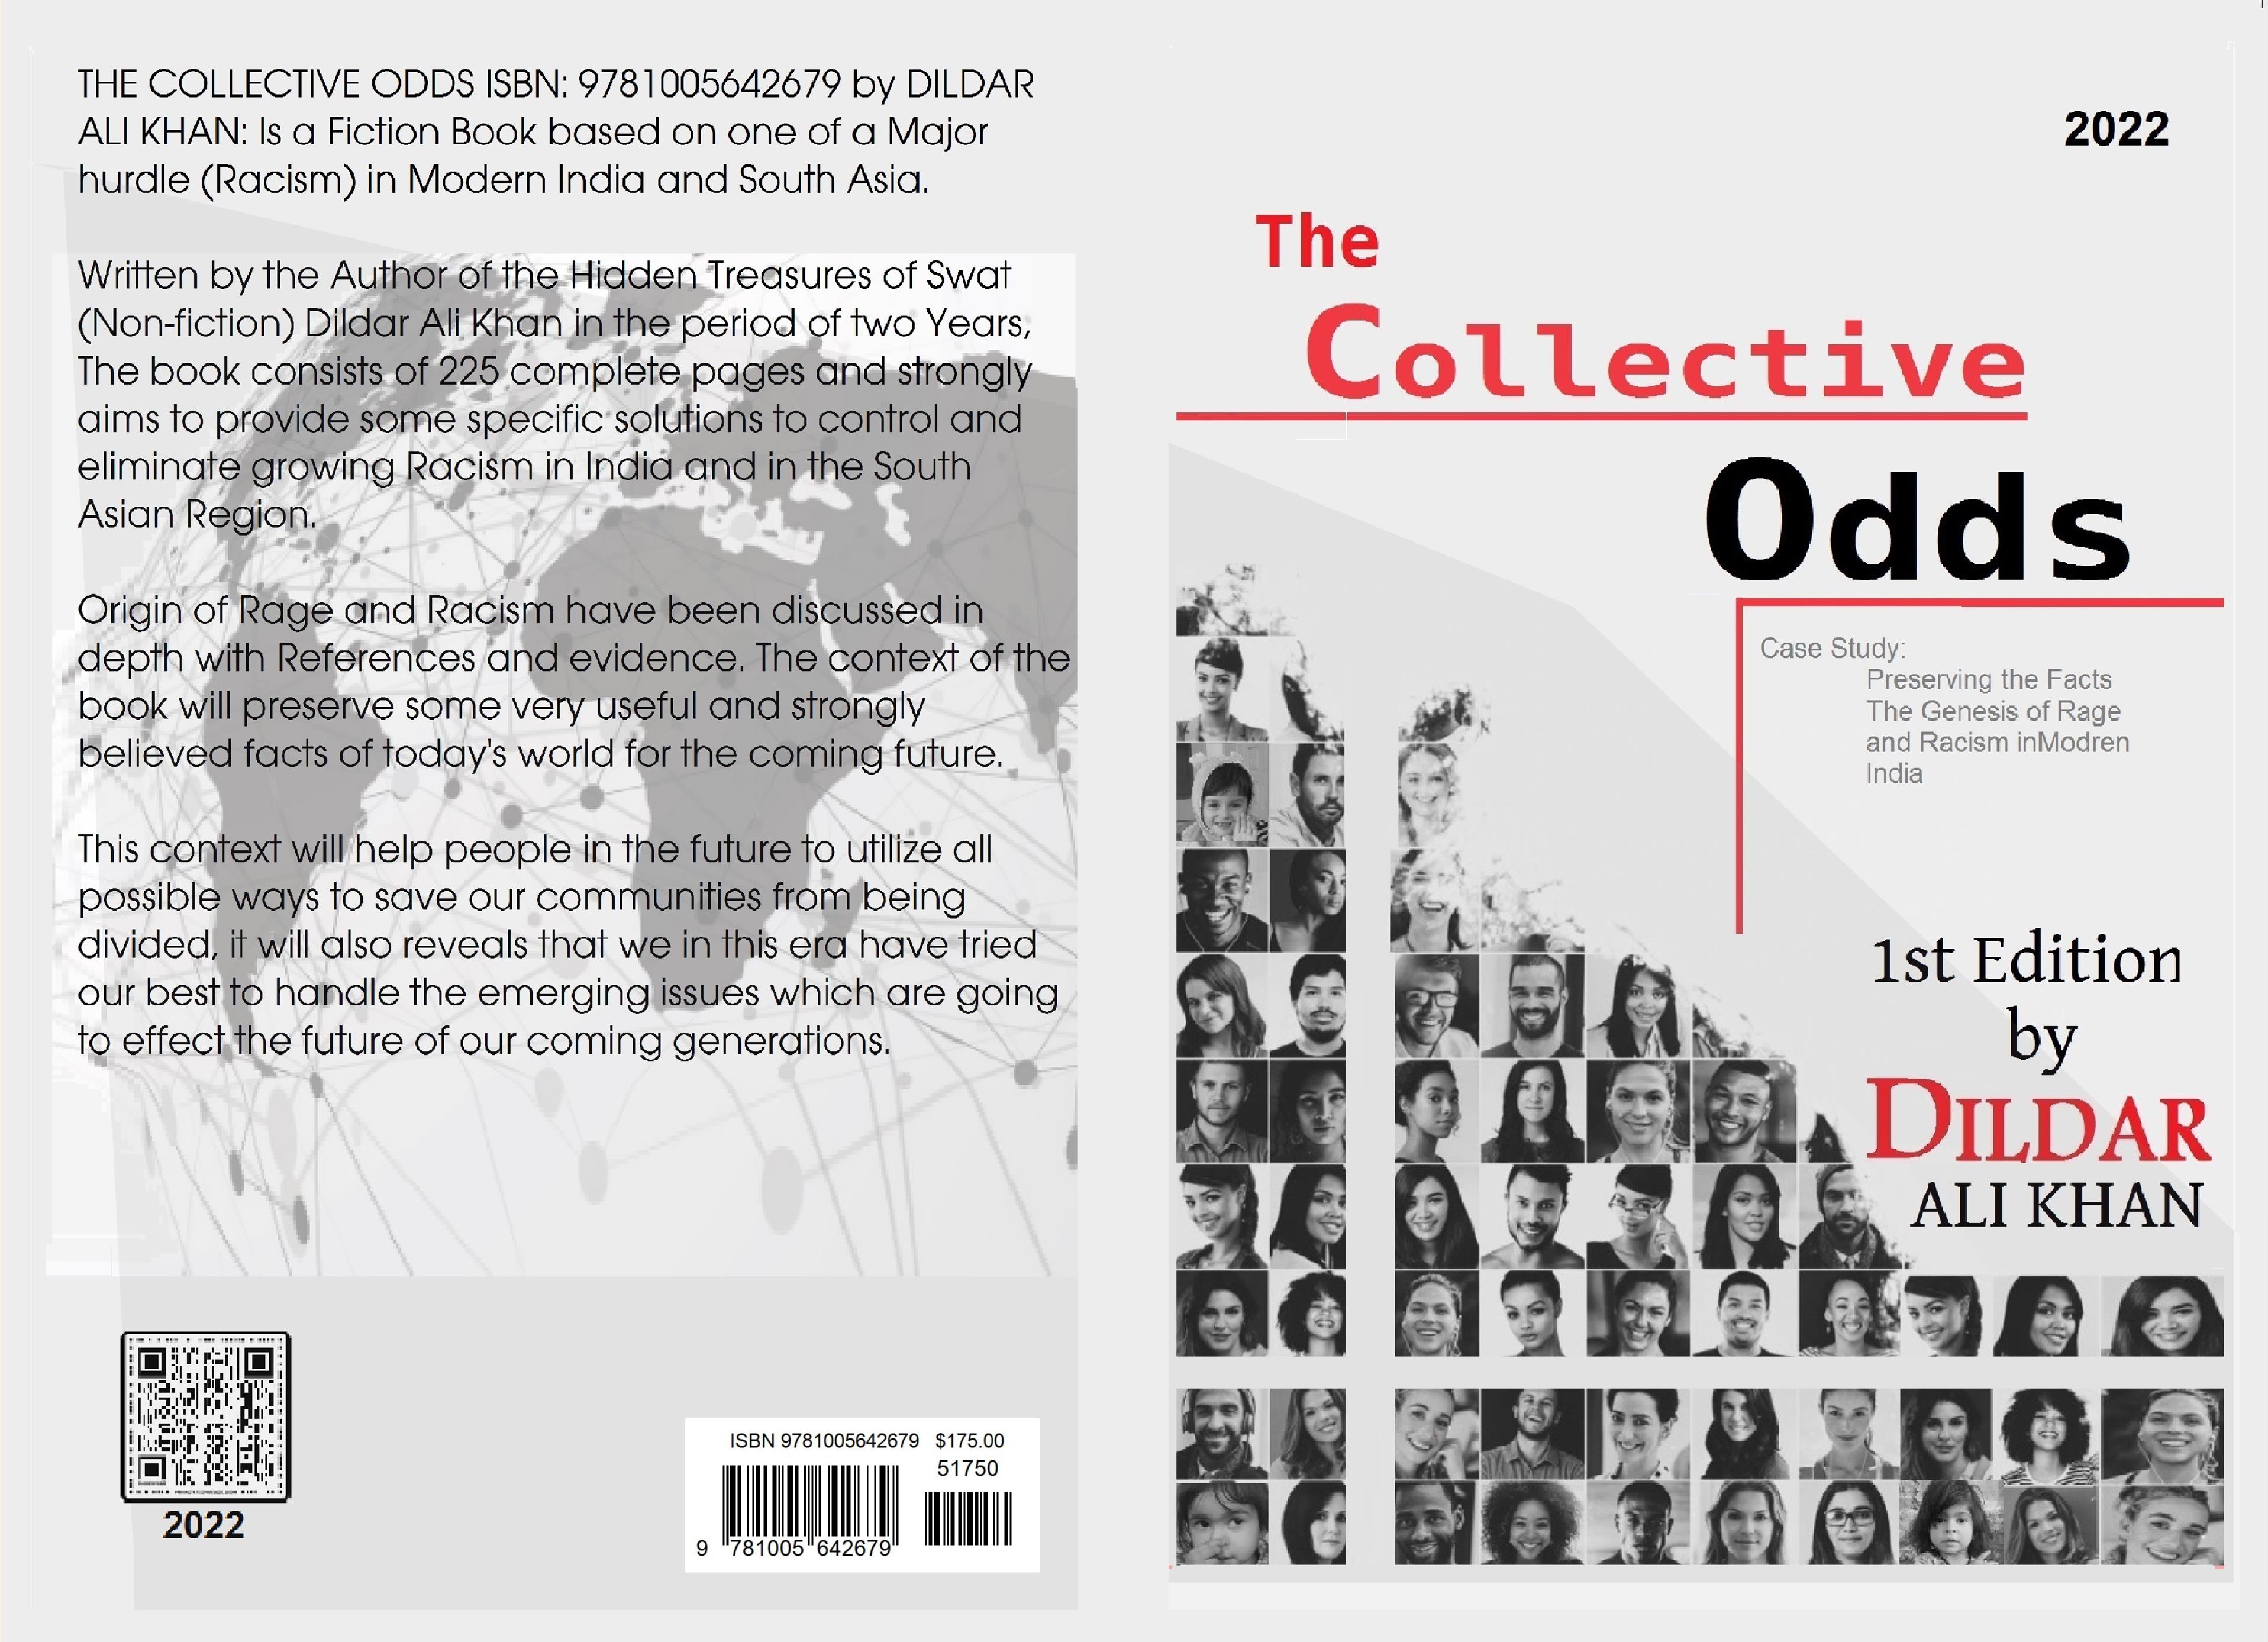 THE COLLECTIVE ODDS cover image